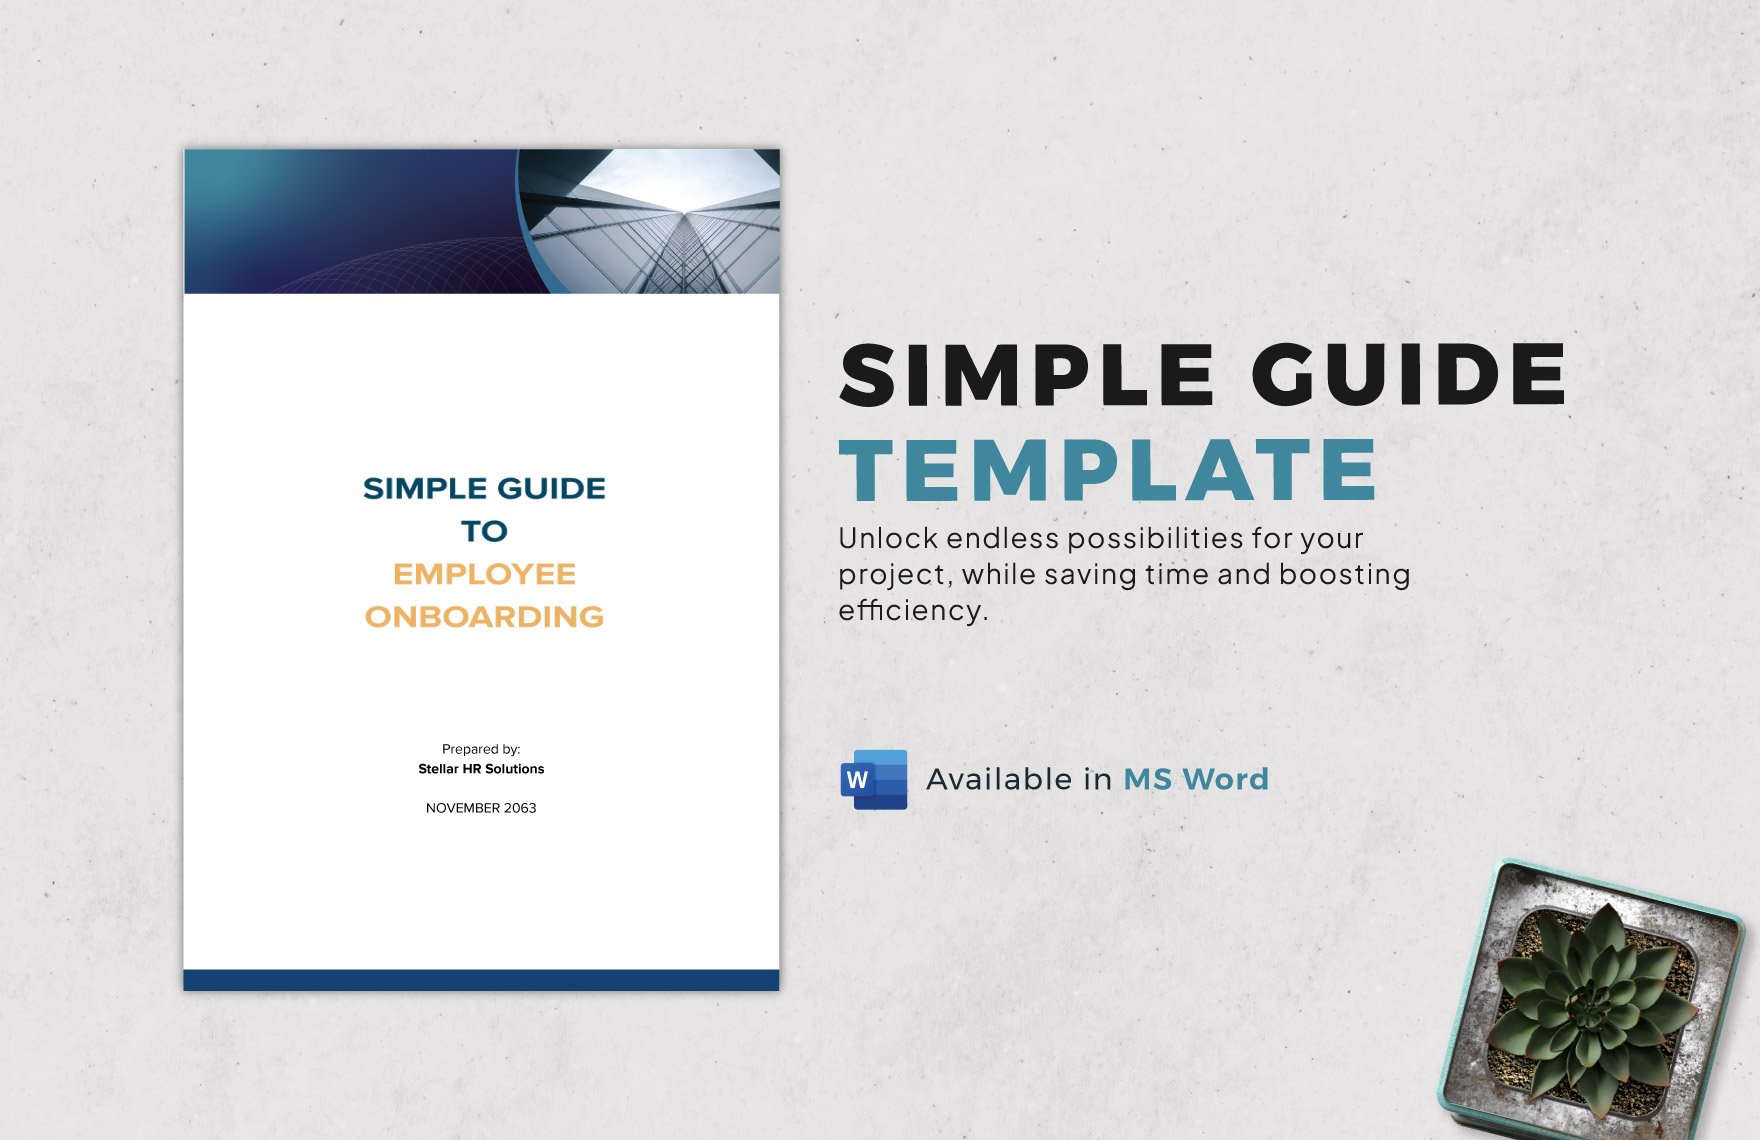 Simple Guide Template in Word